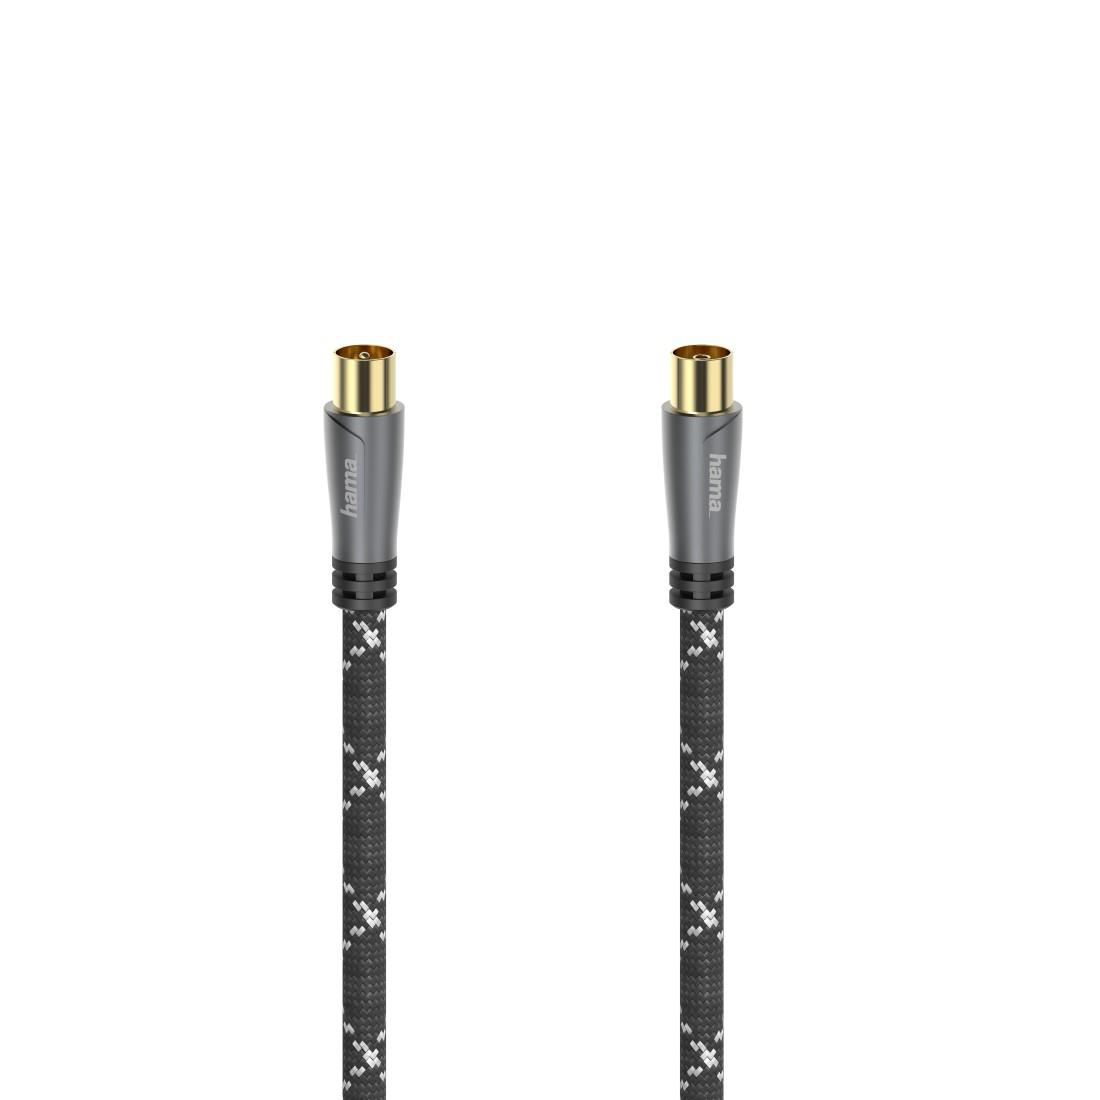 Hama 205071 W128824536 1 Coaxial Cable 3 M Black, 